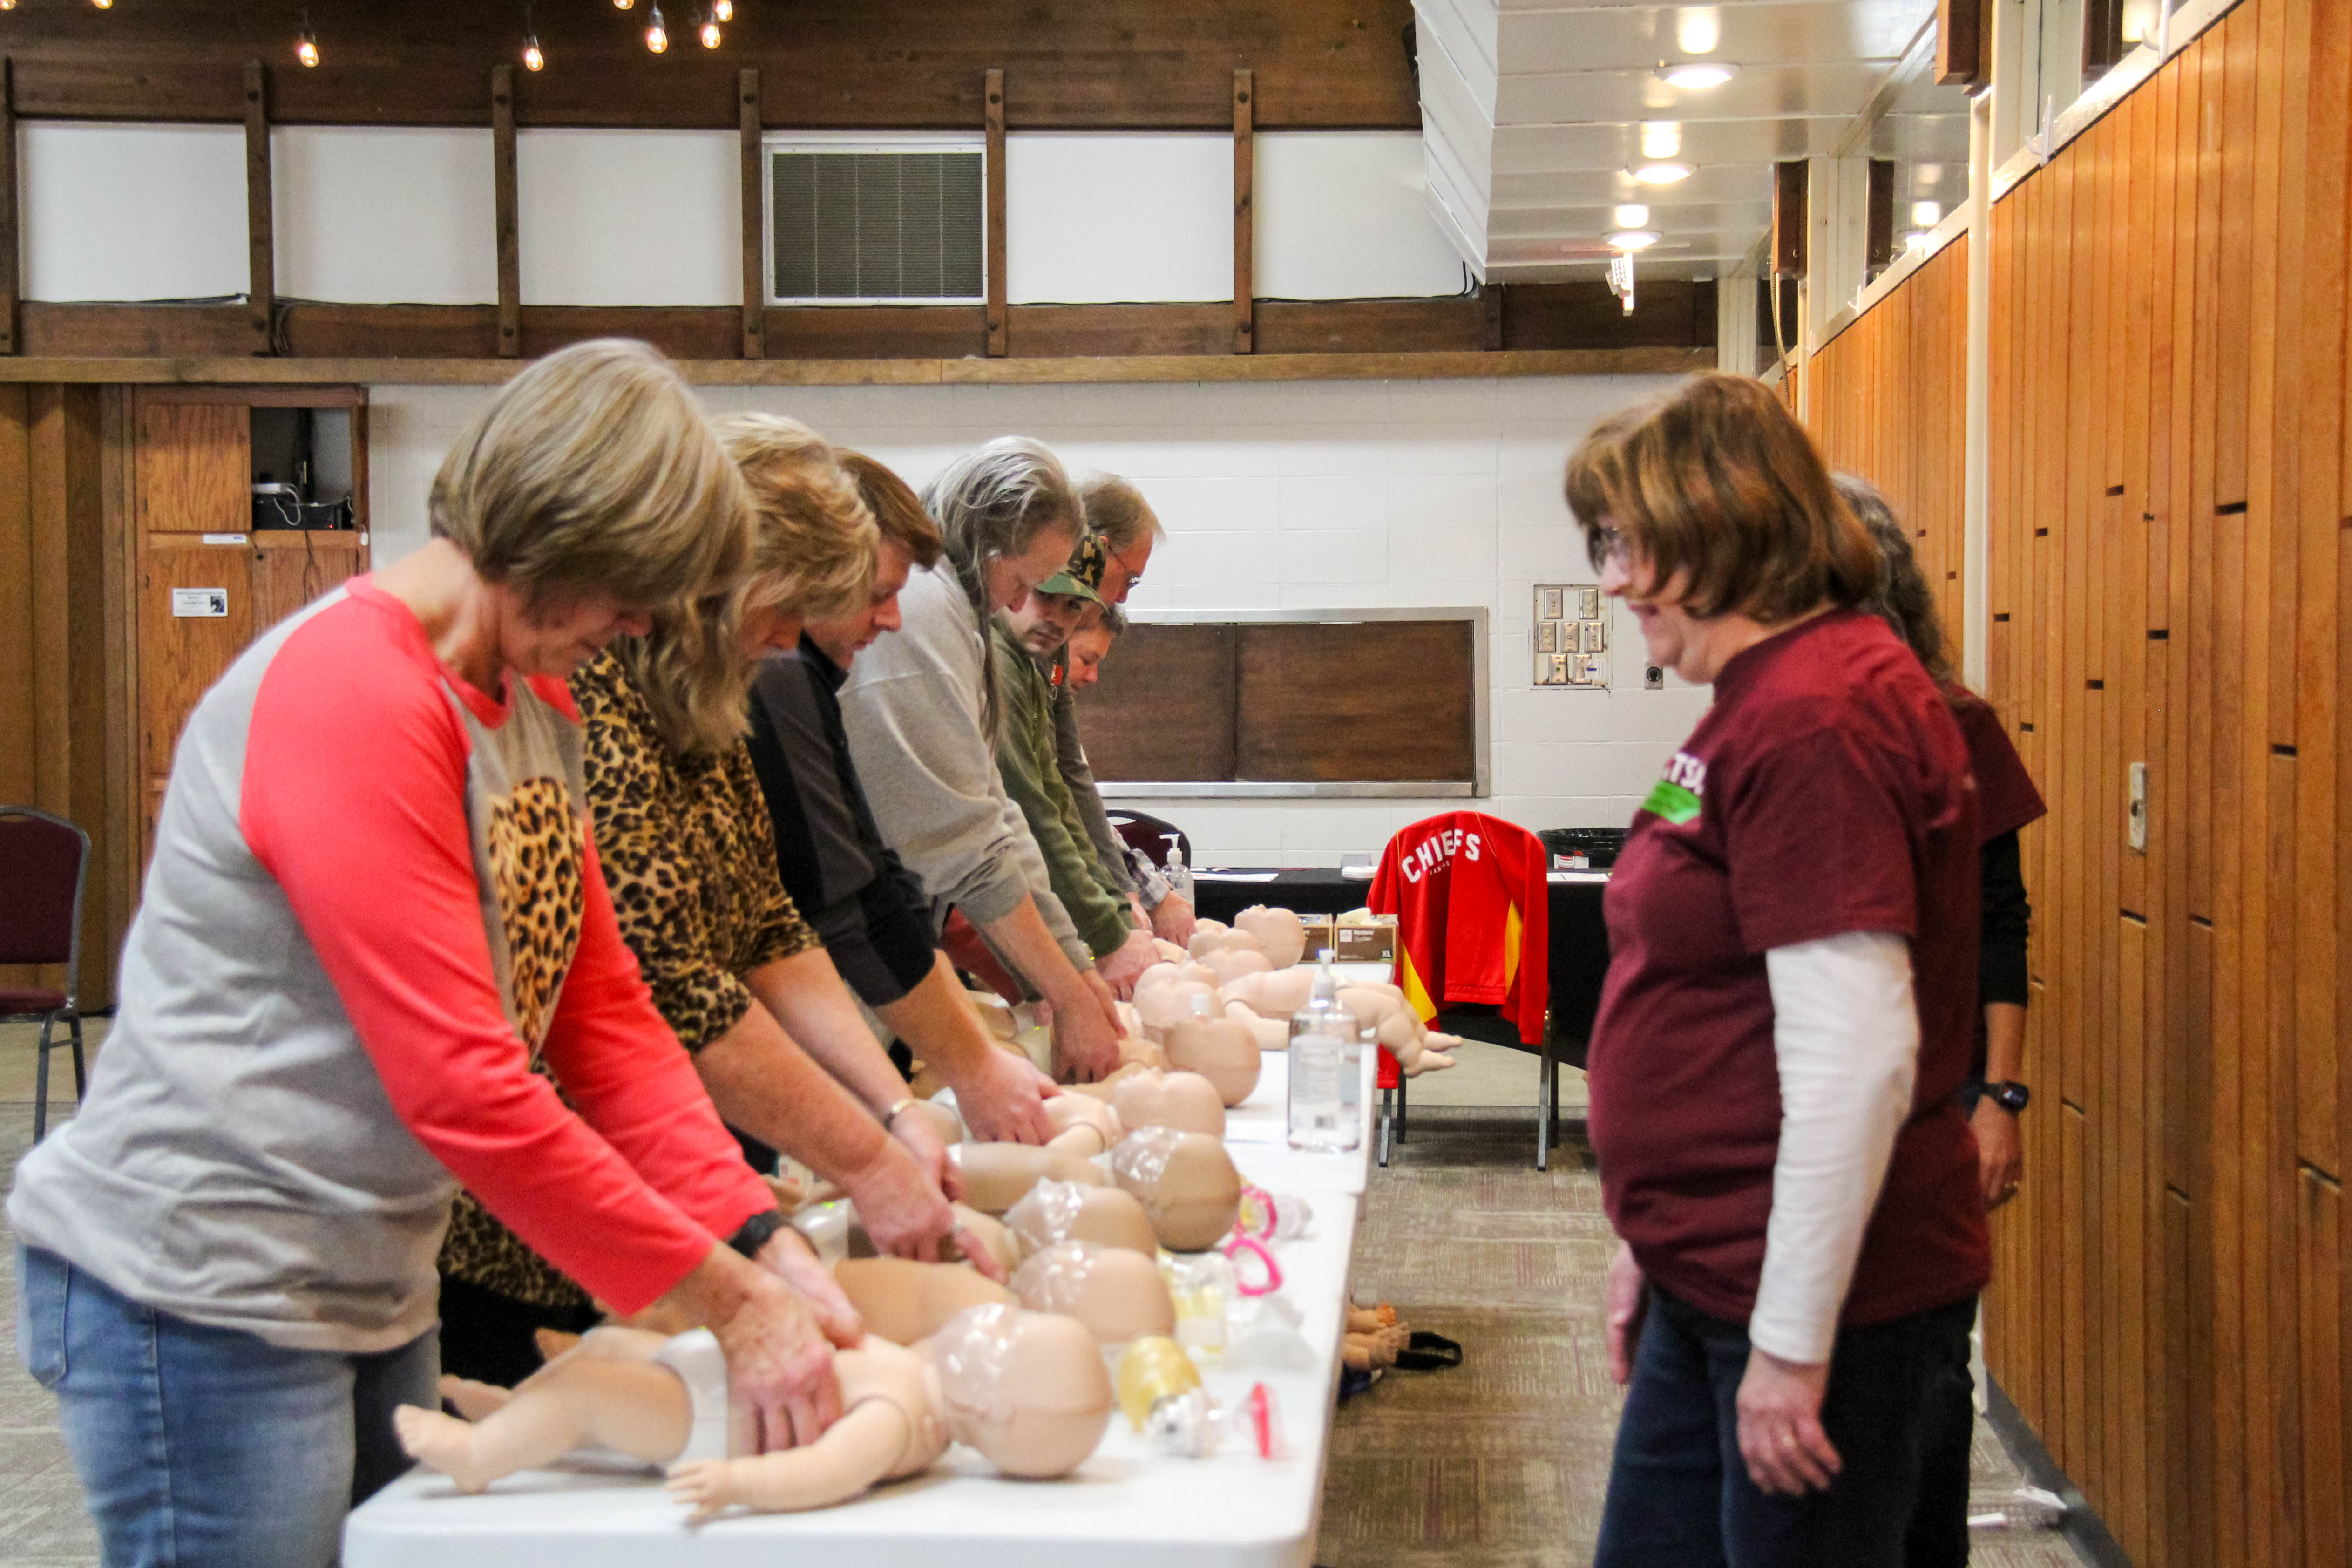 Over 100 professionals and community members were CPR certified in February at Baden Square as part of the Beats Go On community wellness initiative. At right, instructor Barb Humpert teaches infant CPR.